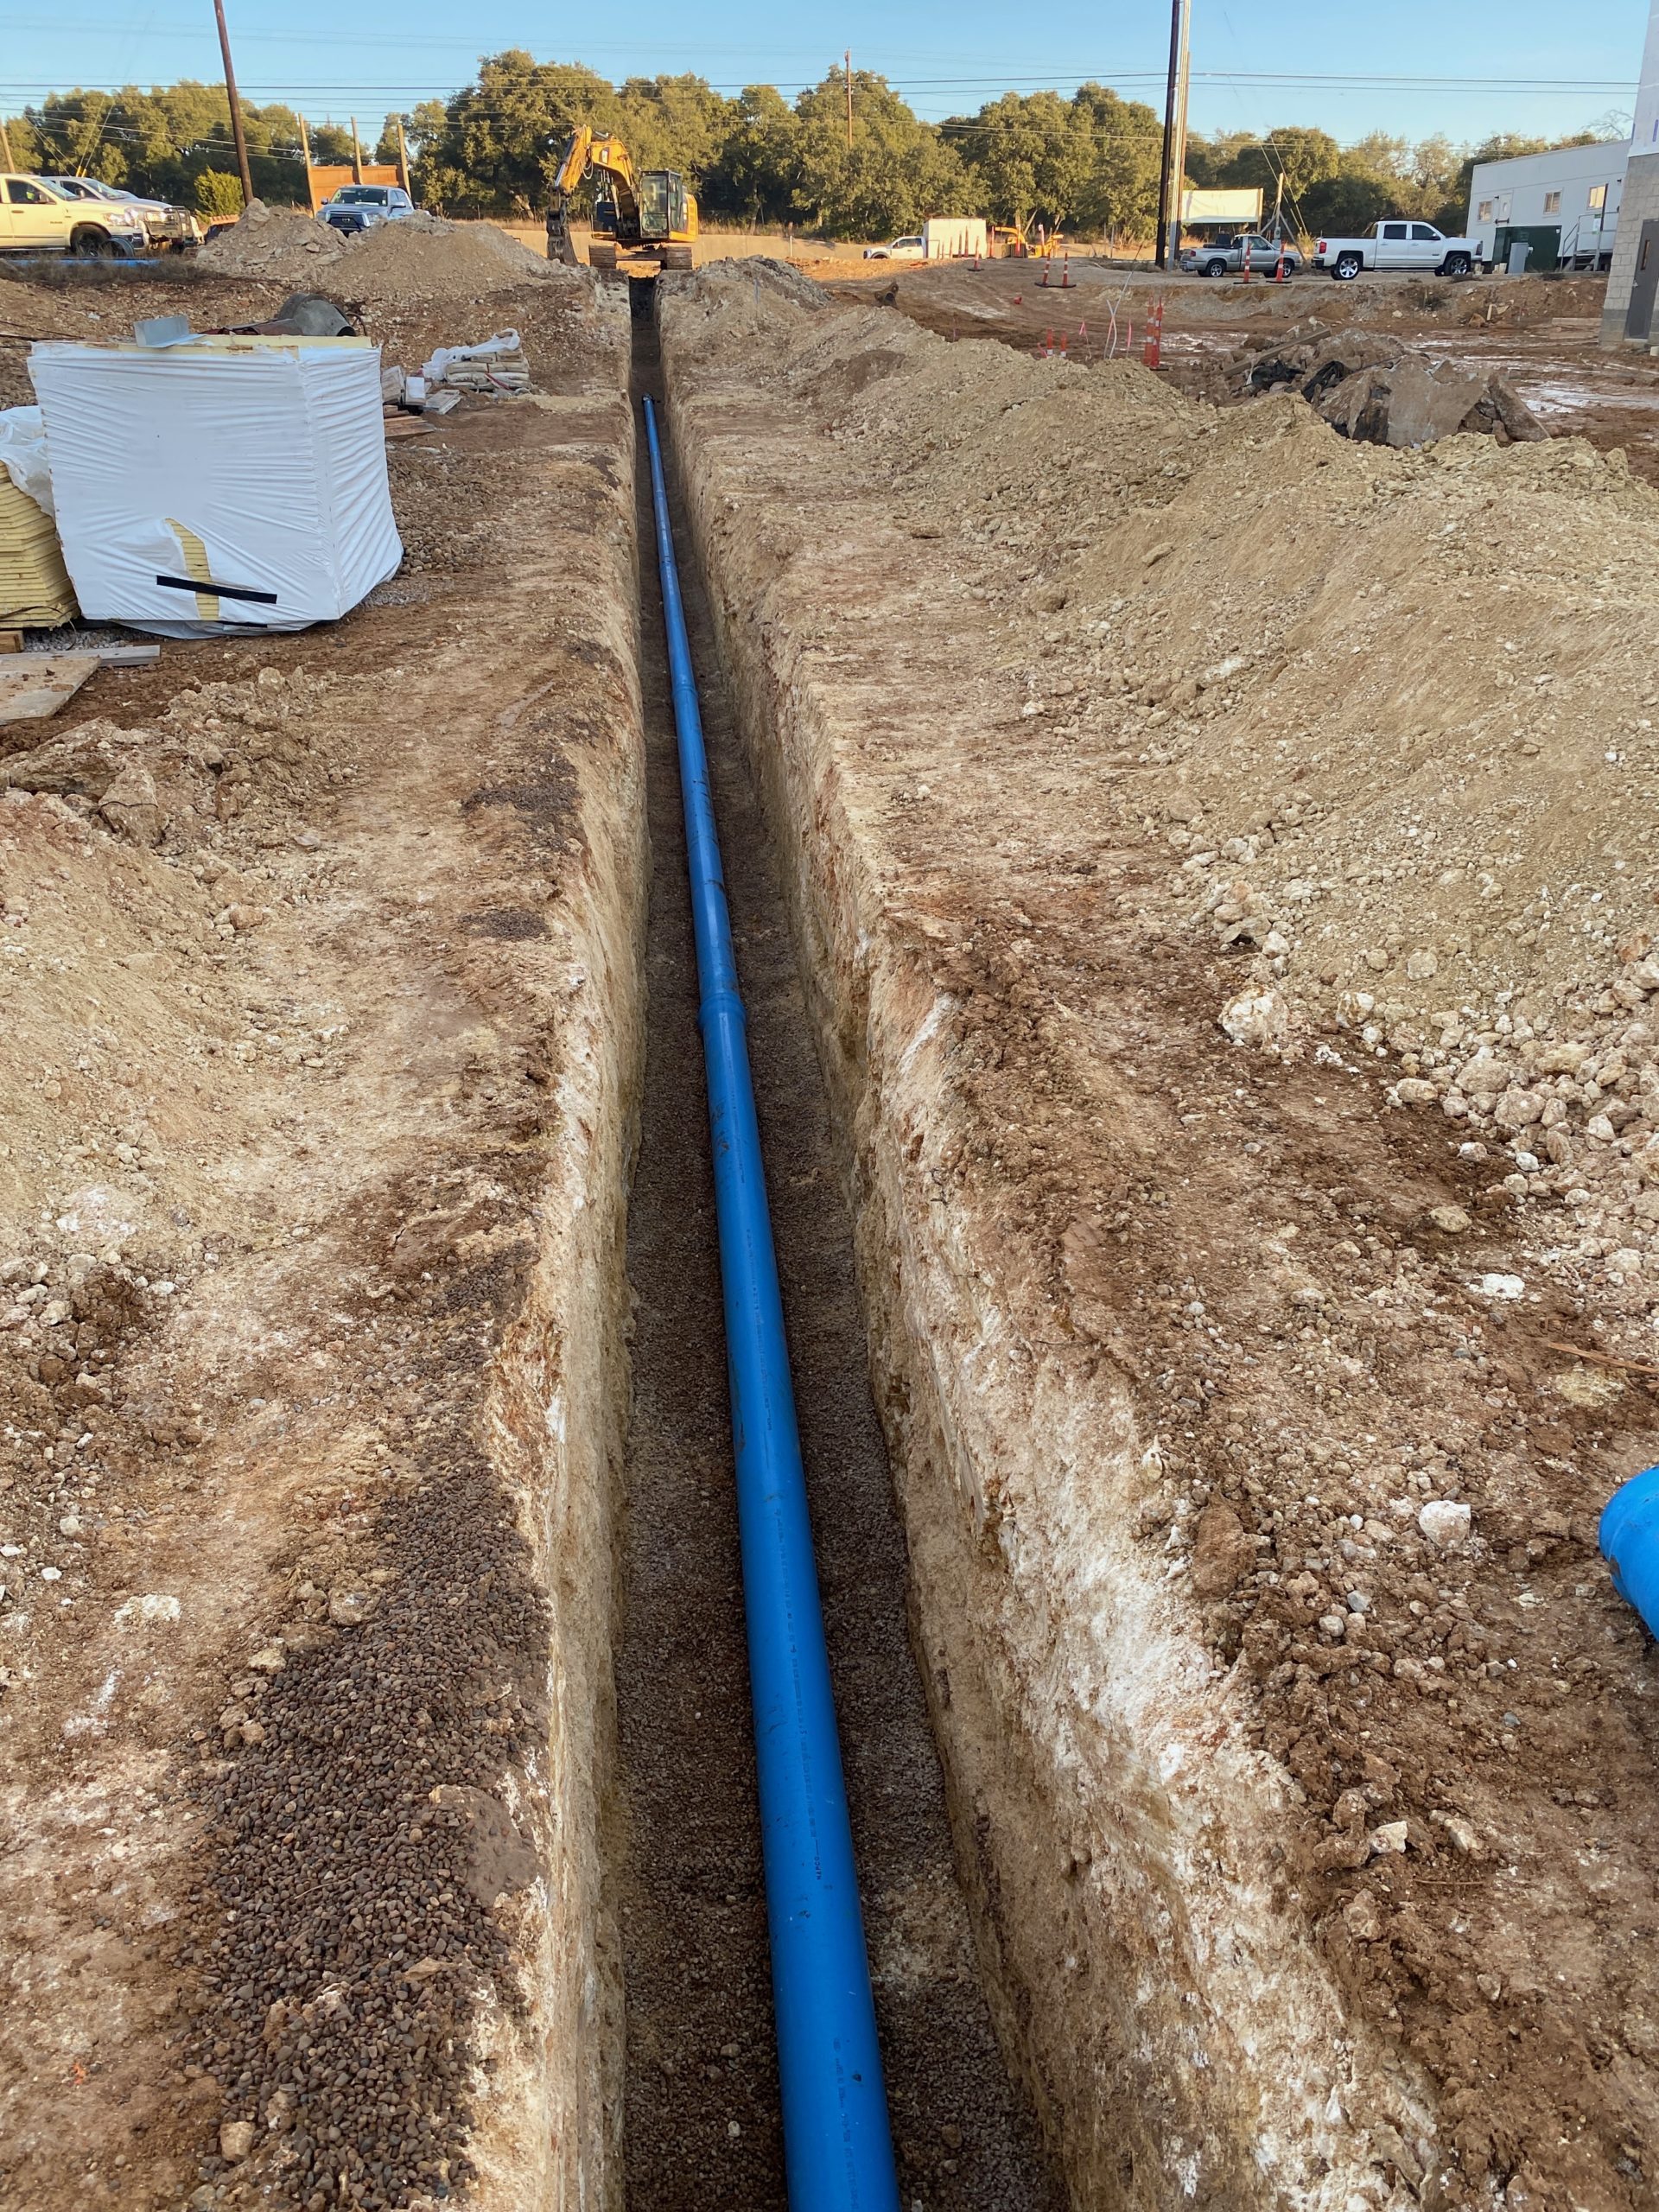 Very long blue pipe going off into distance.